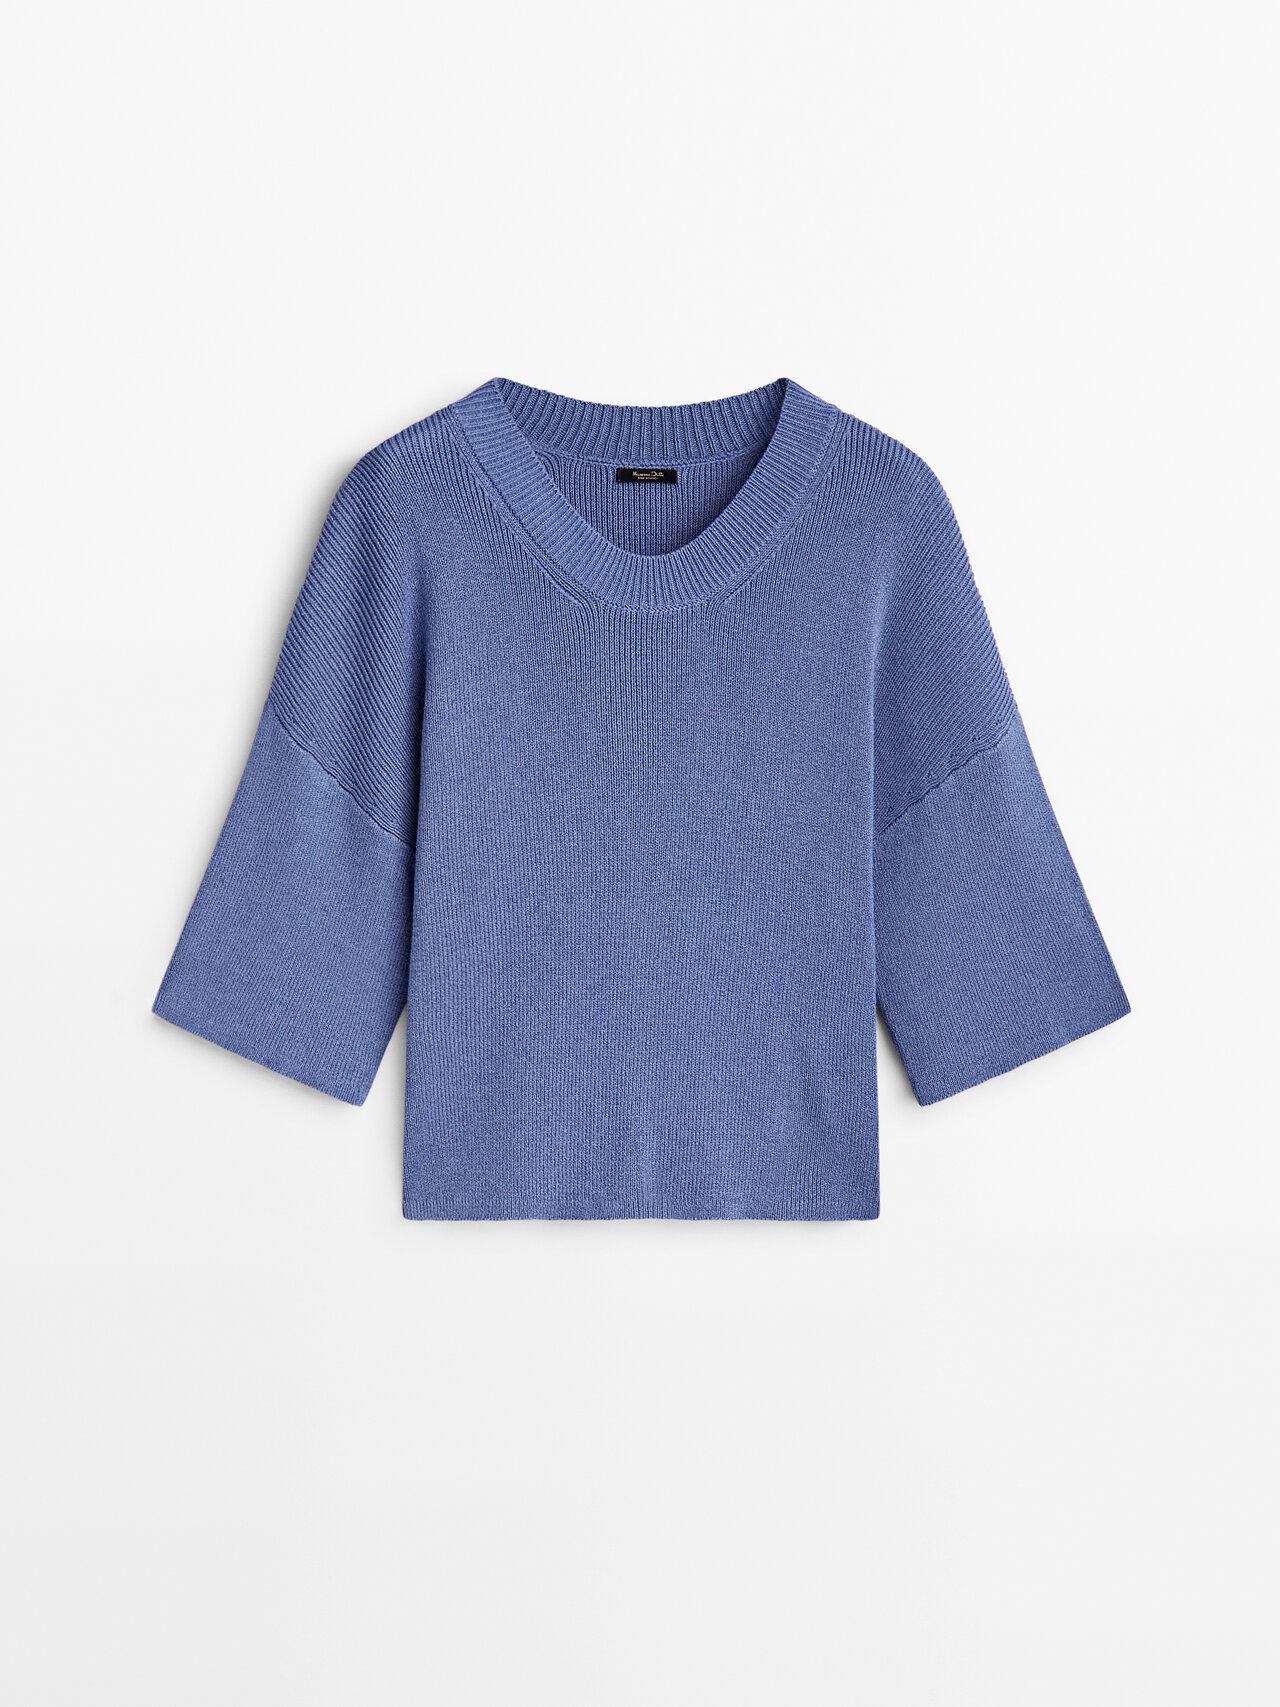 MASSIMO DUTTI Knit Sweater With 3/4 Sleeves in Blue | Lyst